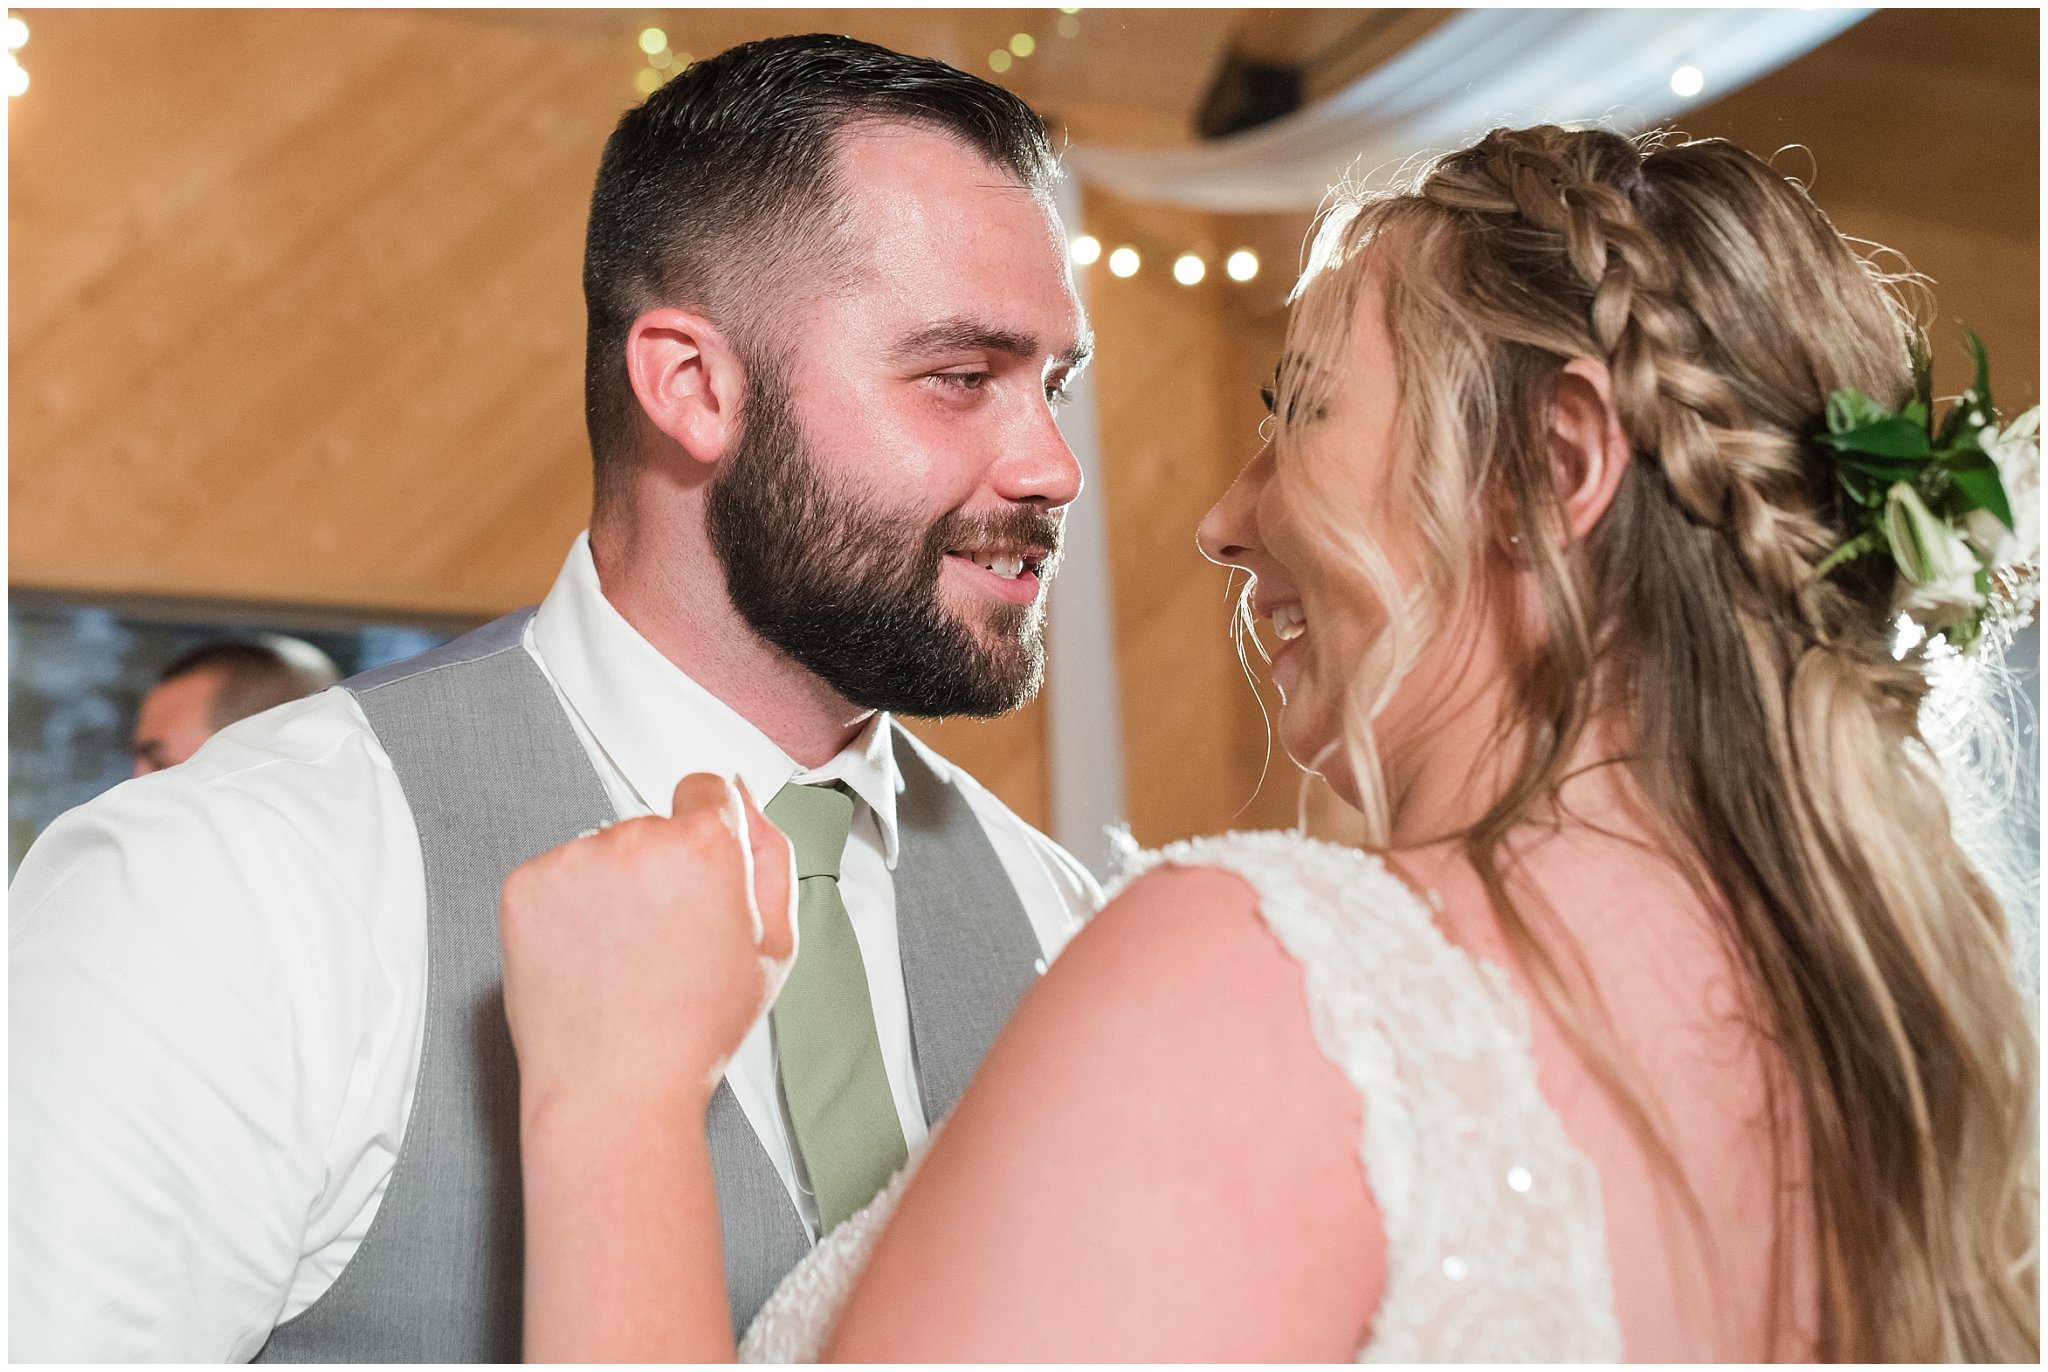 Party dancing in a barn during wedding reception | Sage Green and Gray Summer Wedding at Oak Hills | Jessie and Dallin Photography